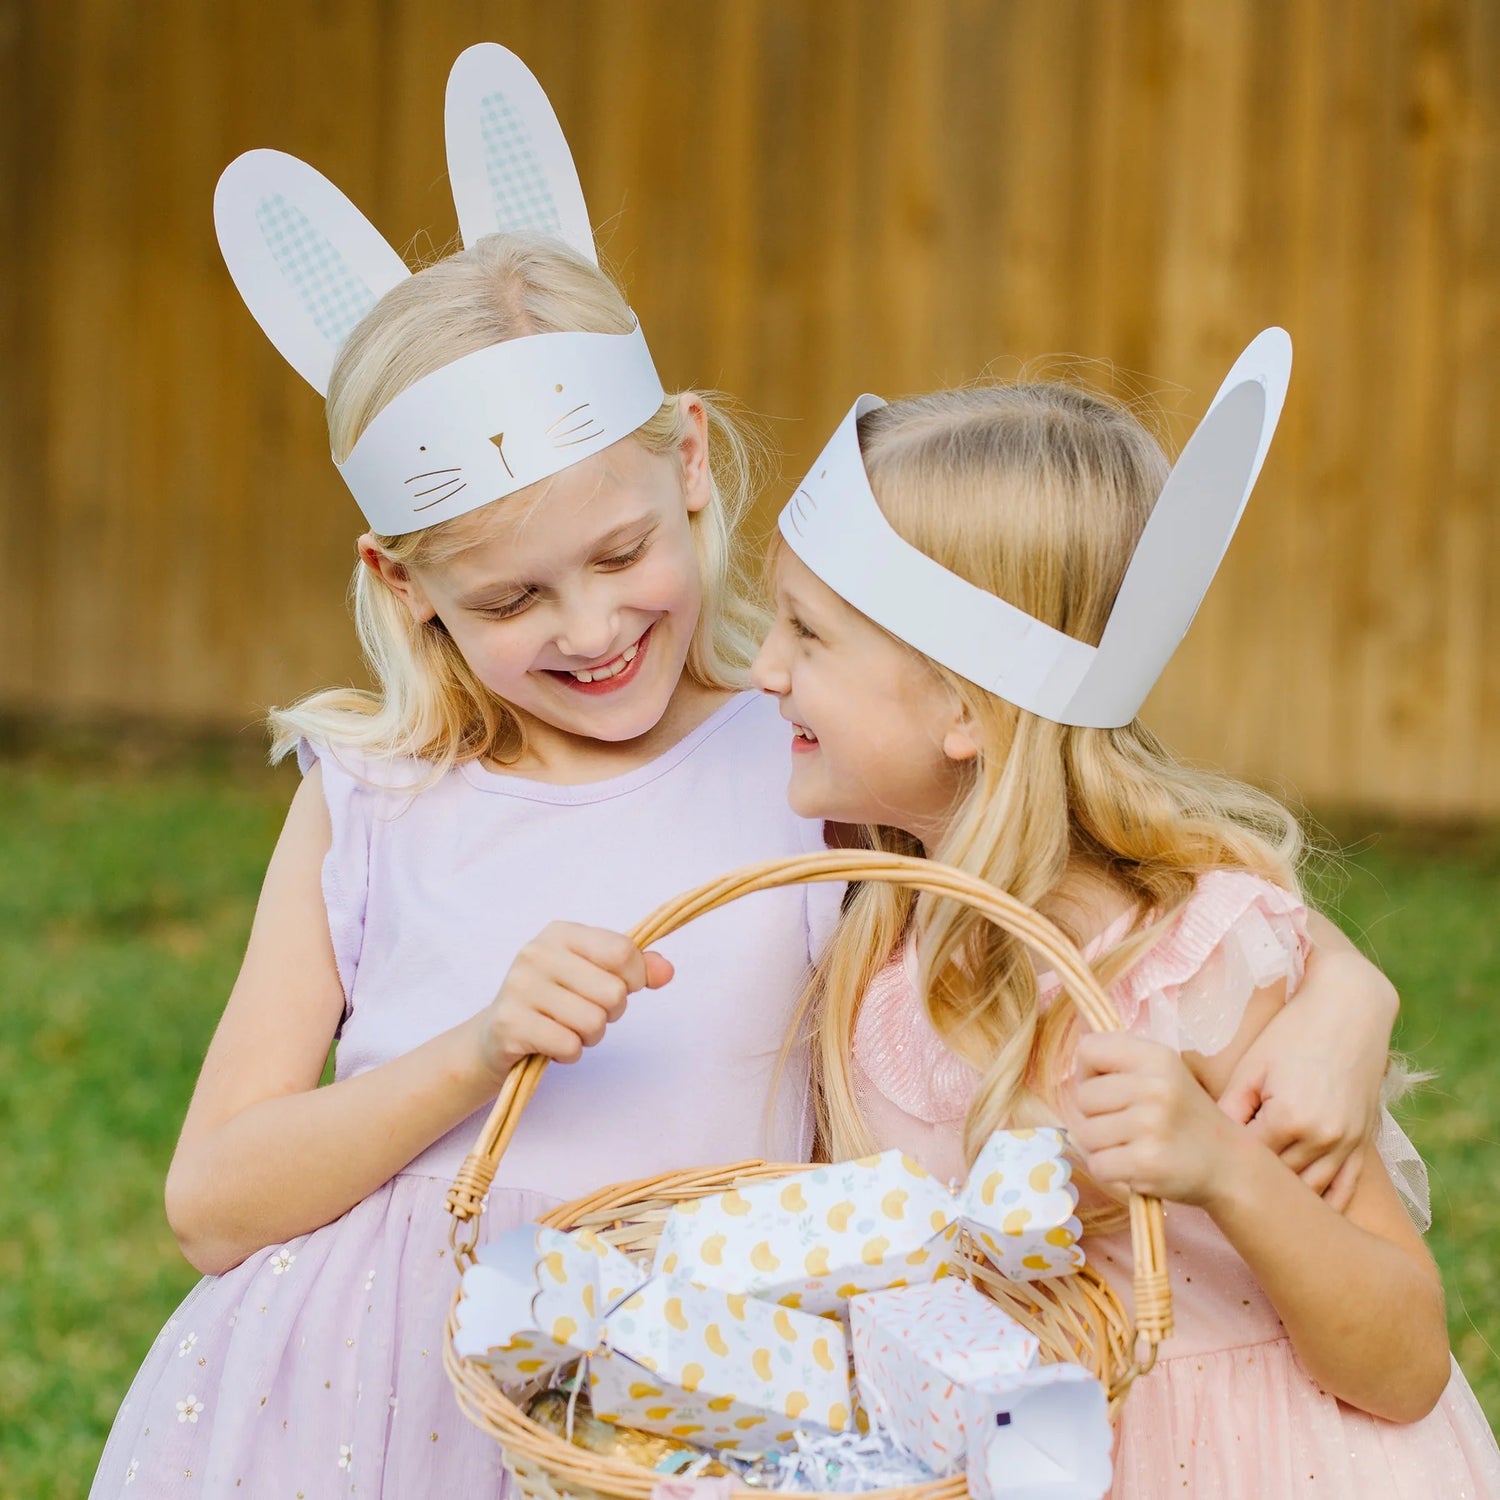 Easter Outfits